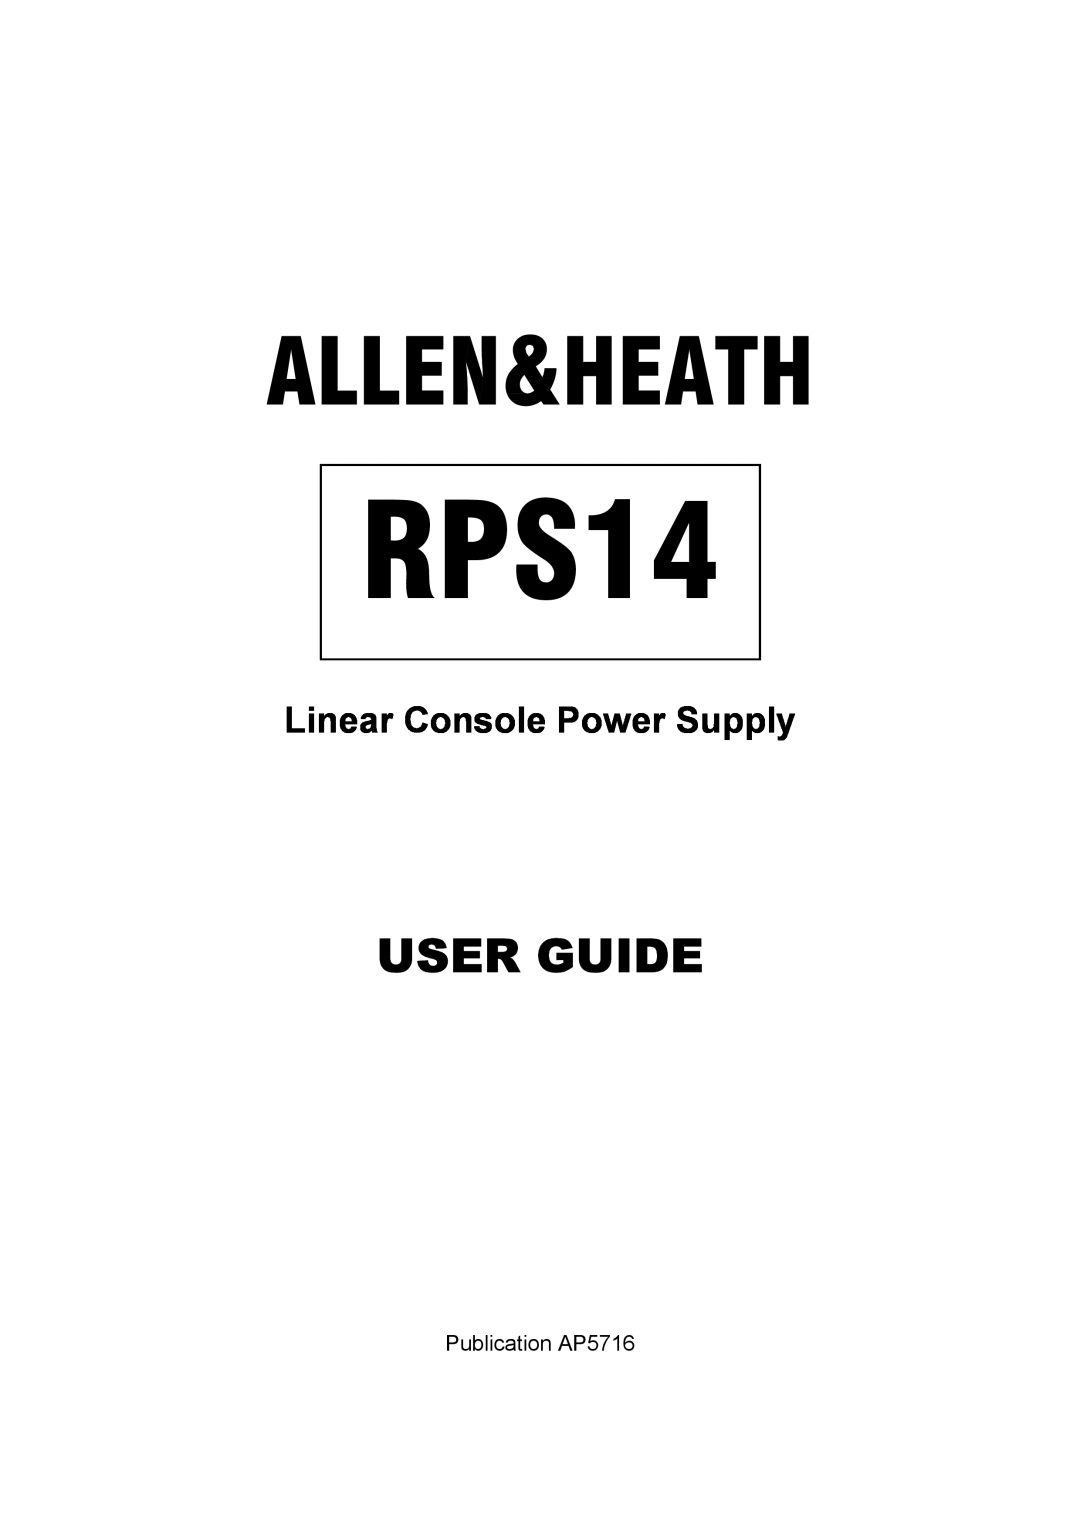 Addlogix RPS14 manual User Guide, Linear Console Power Supply, Publication AP5716 